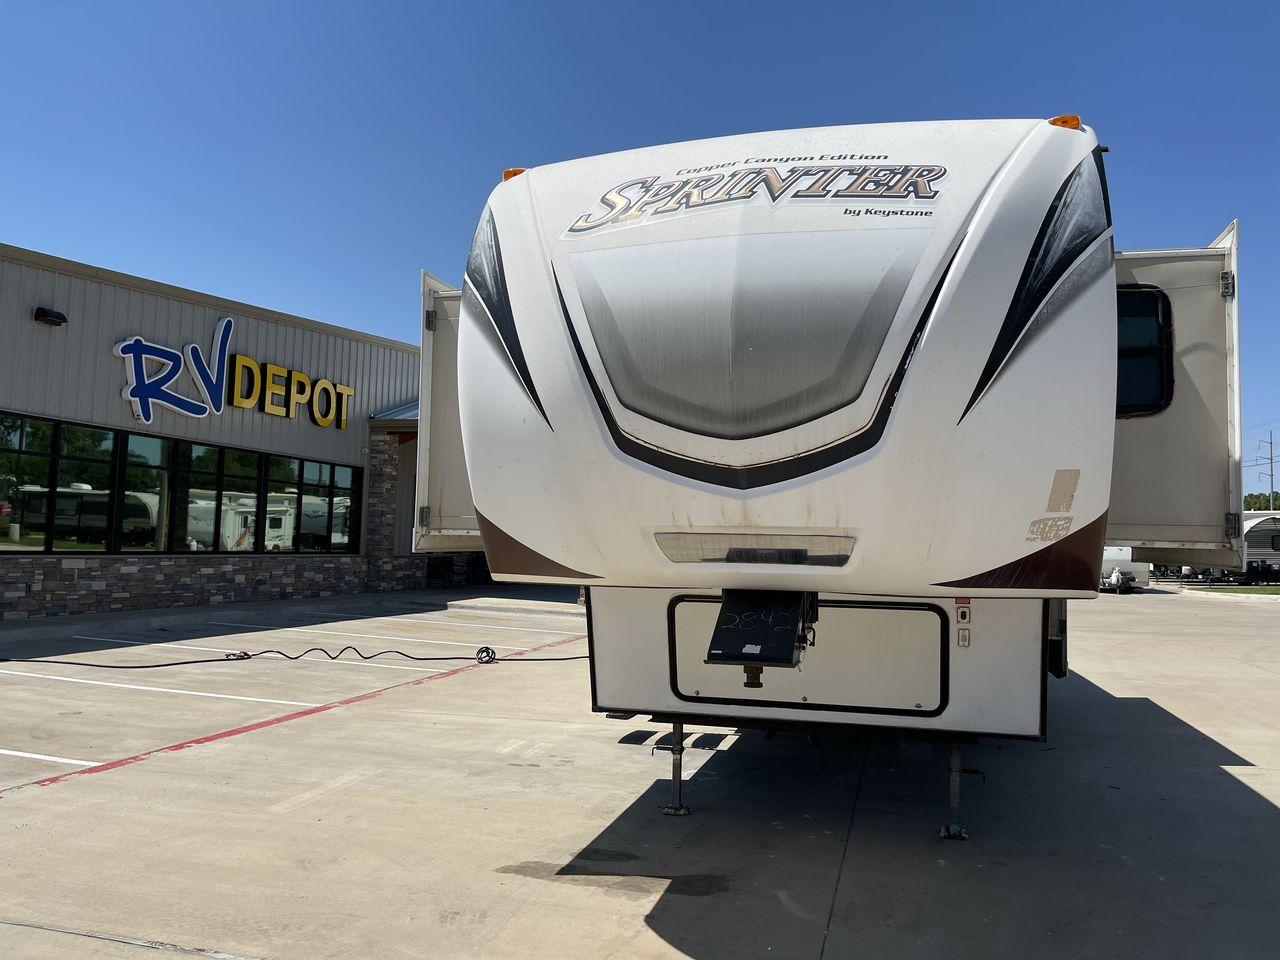 2014 WHITE KEYSTONE SPRINTER 359FWMPR - (4YDF33321E1) , Length: 37.33 ft. | Dry Weight: 9,598 lbs. | Gross Weight: 12,750 lbs. | Slides: 3 transmission, located at 4319 N Main St, Cleburne, TX, 76033, (817) 678-5133, 32.385960, -97.391212 - The 2014 Sprinter 333FWLS by Keystone luxury fifth wheel brings the spotlight to its elevated front living area floorplan with a rear private bedroom and a spacious center kitchen. It measures just 37.33 ft in length, 8 ft in width, and 12.5 ft in height. It has a base weight of 9,598 lbs with a pay - Photo #0